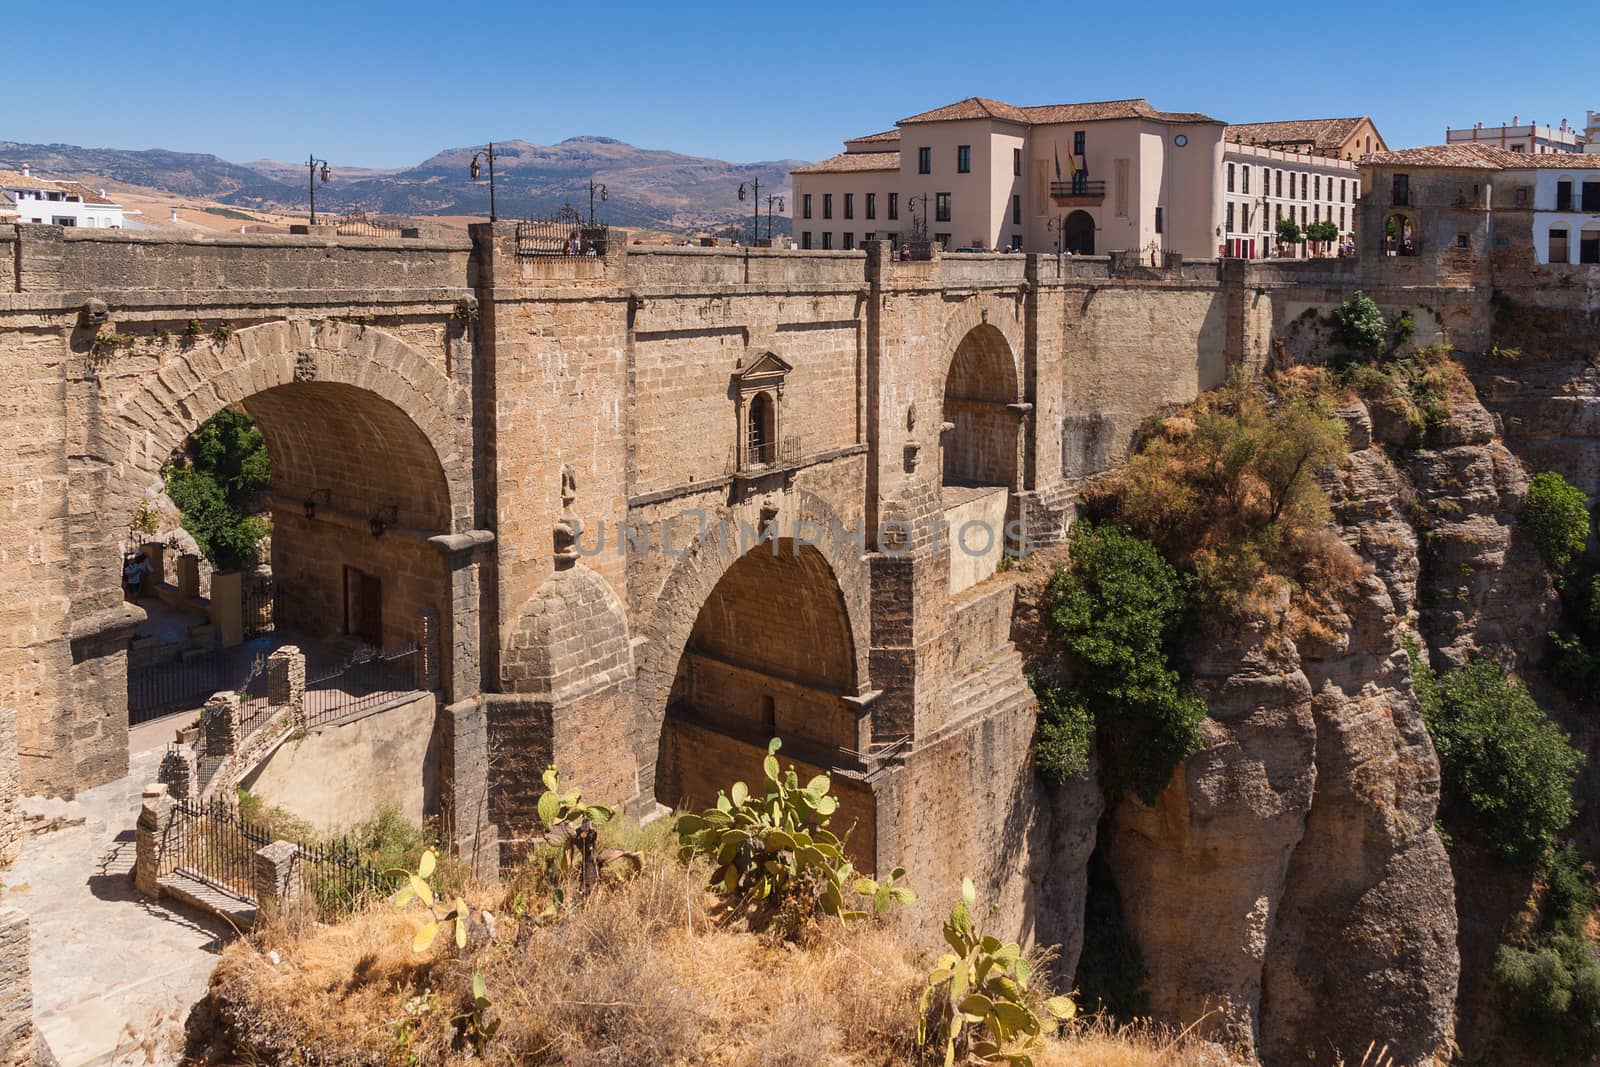 Bridge in the old city of Ronda, Spain by serpl